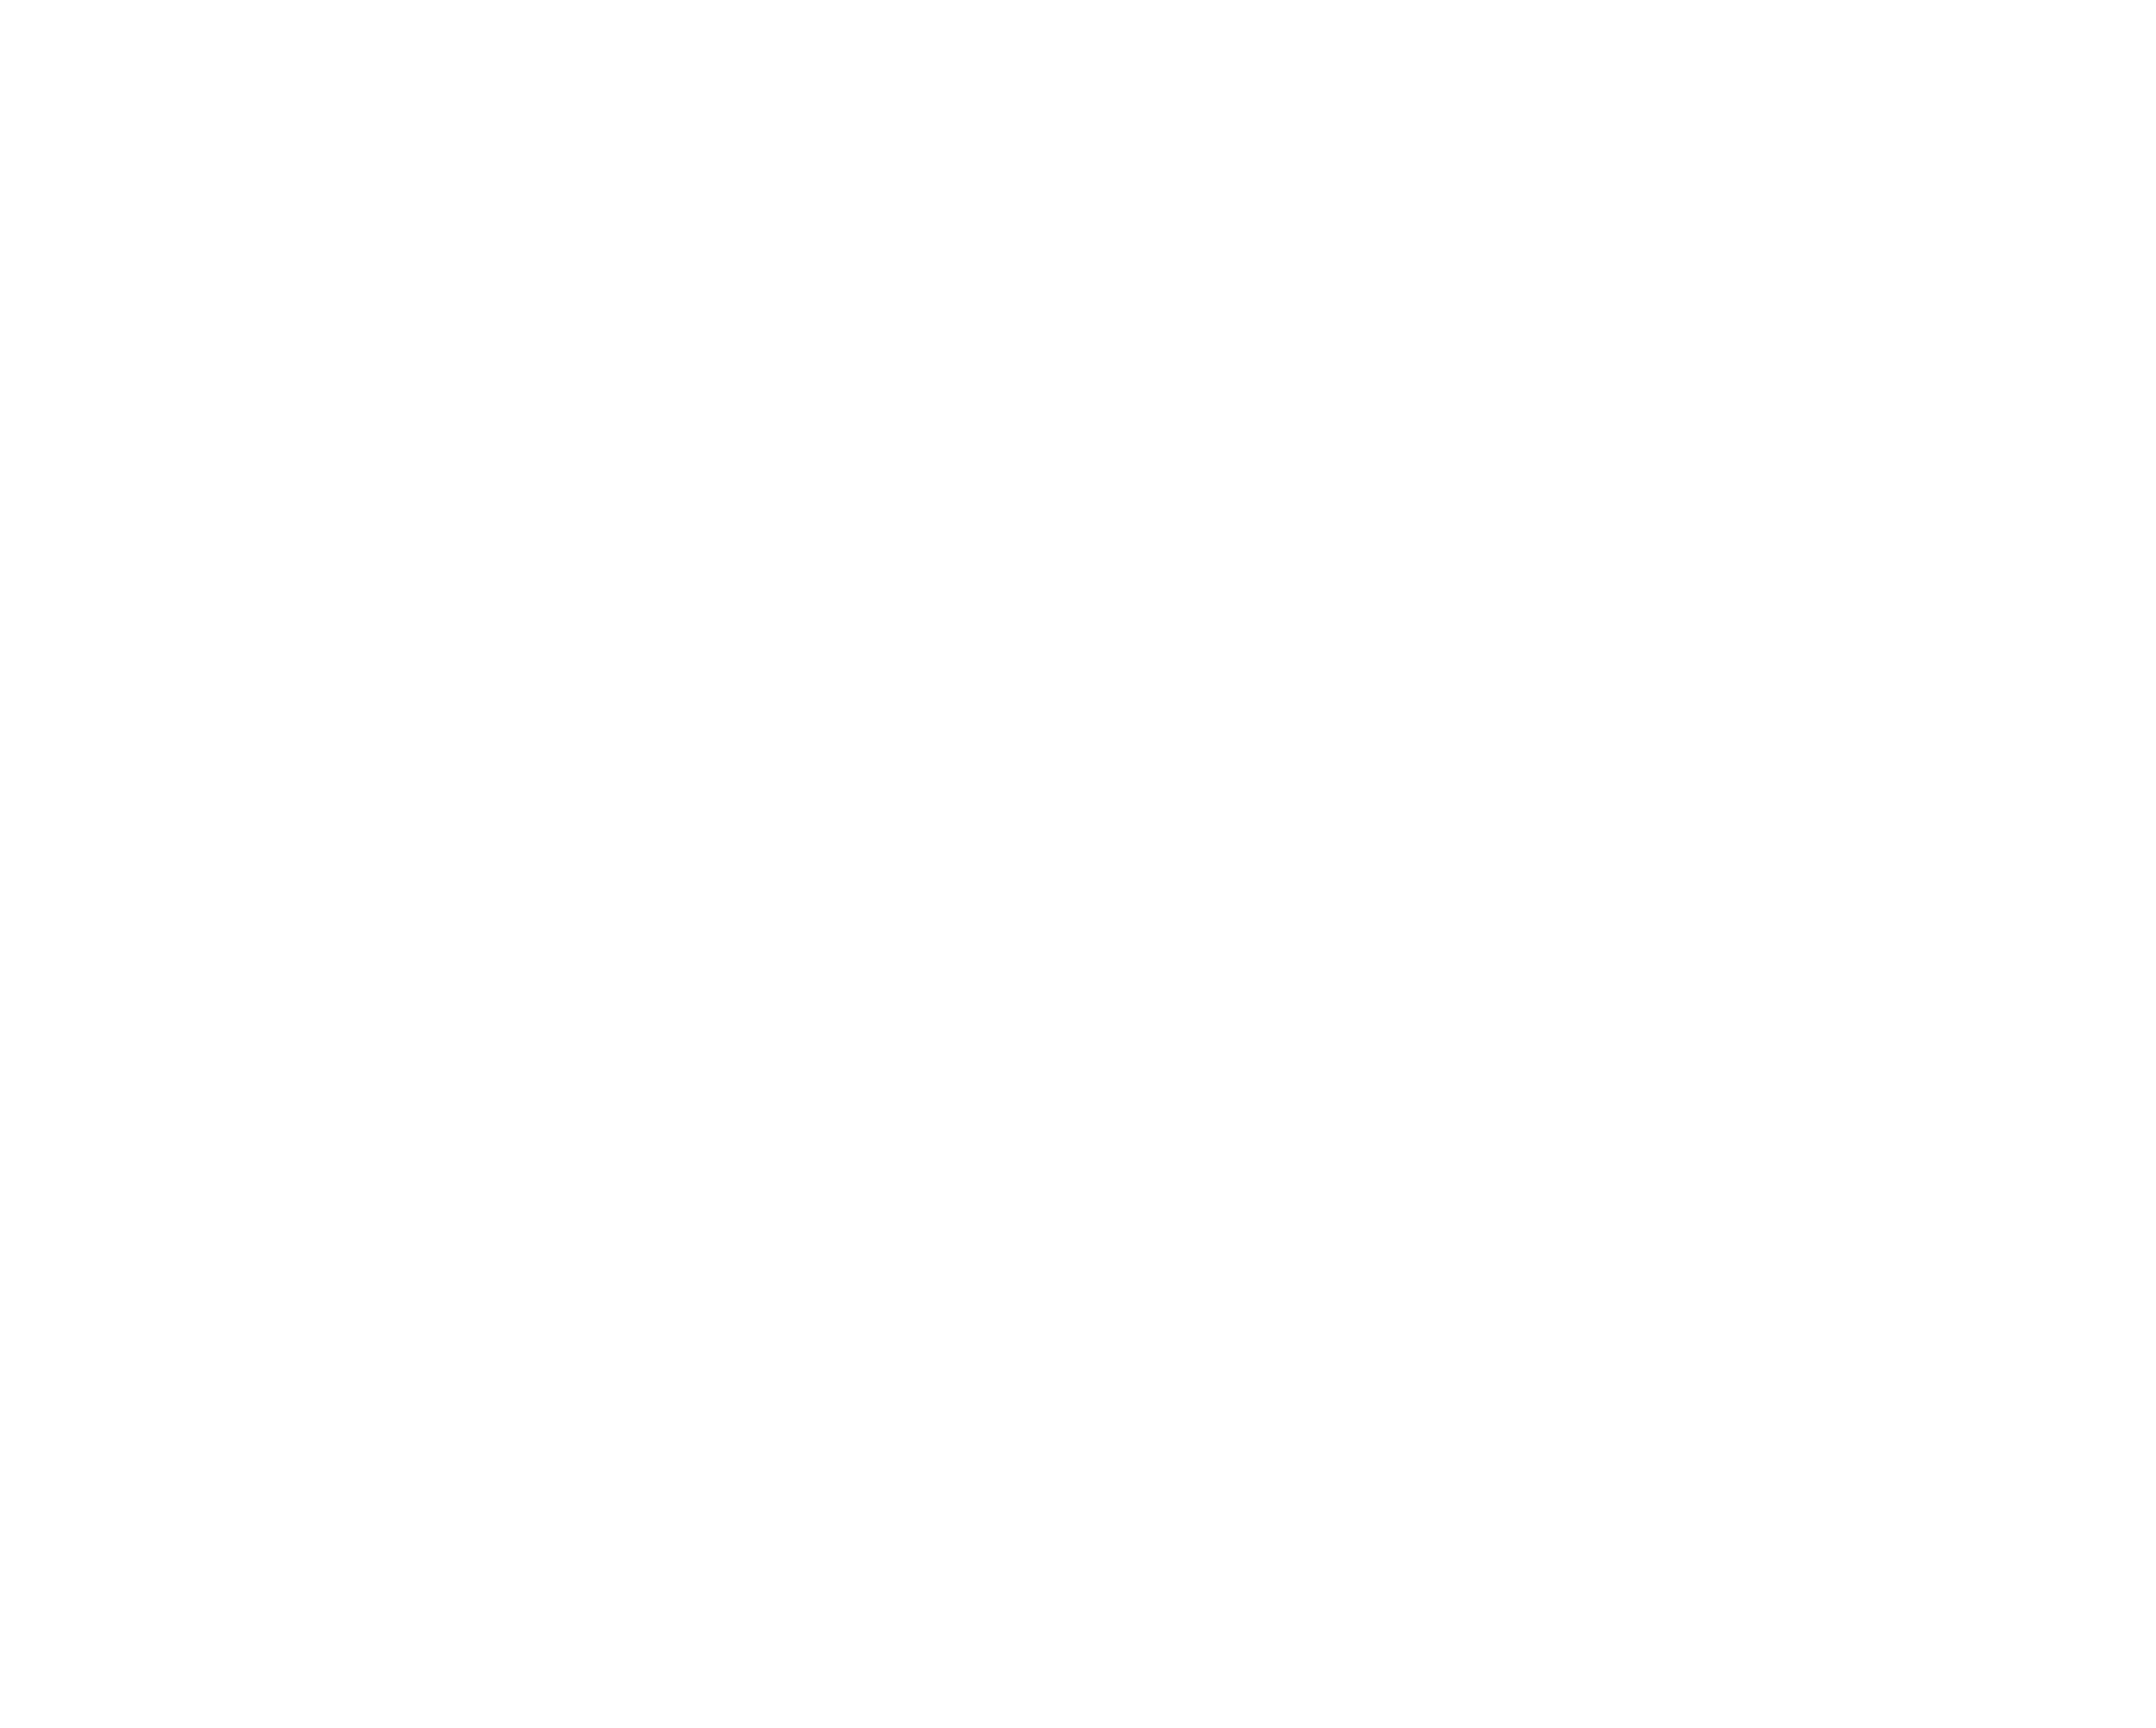 FITUNITY